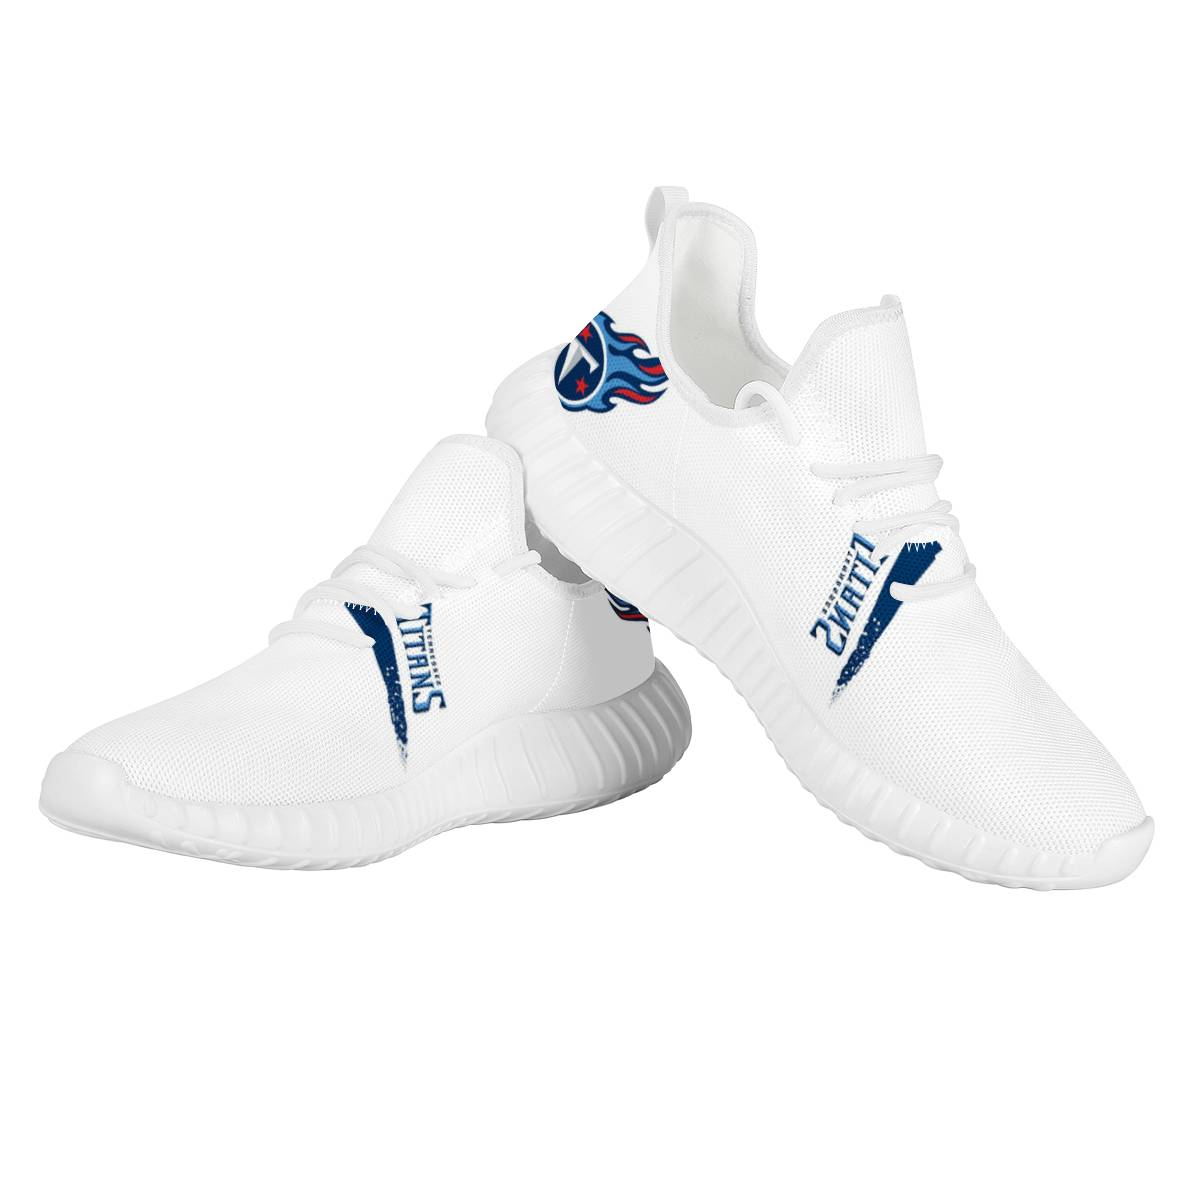 Men's Tennessee Titans Mesh Knit Sneakers/Shoes 006